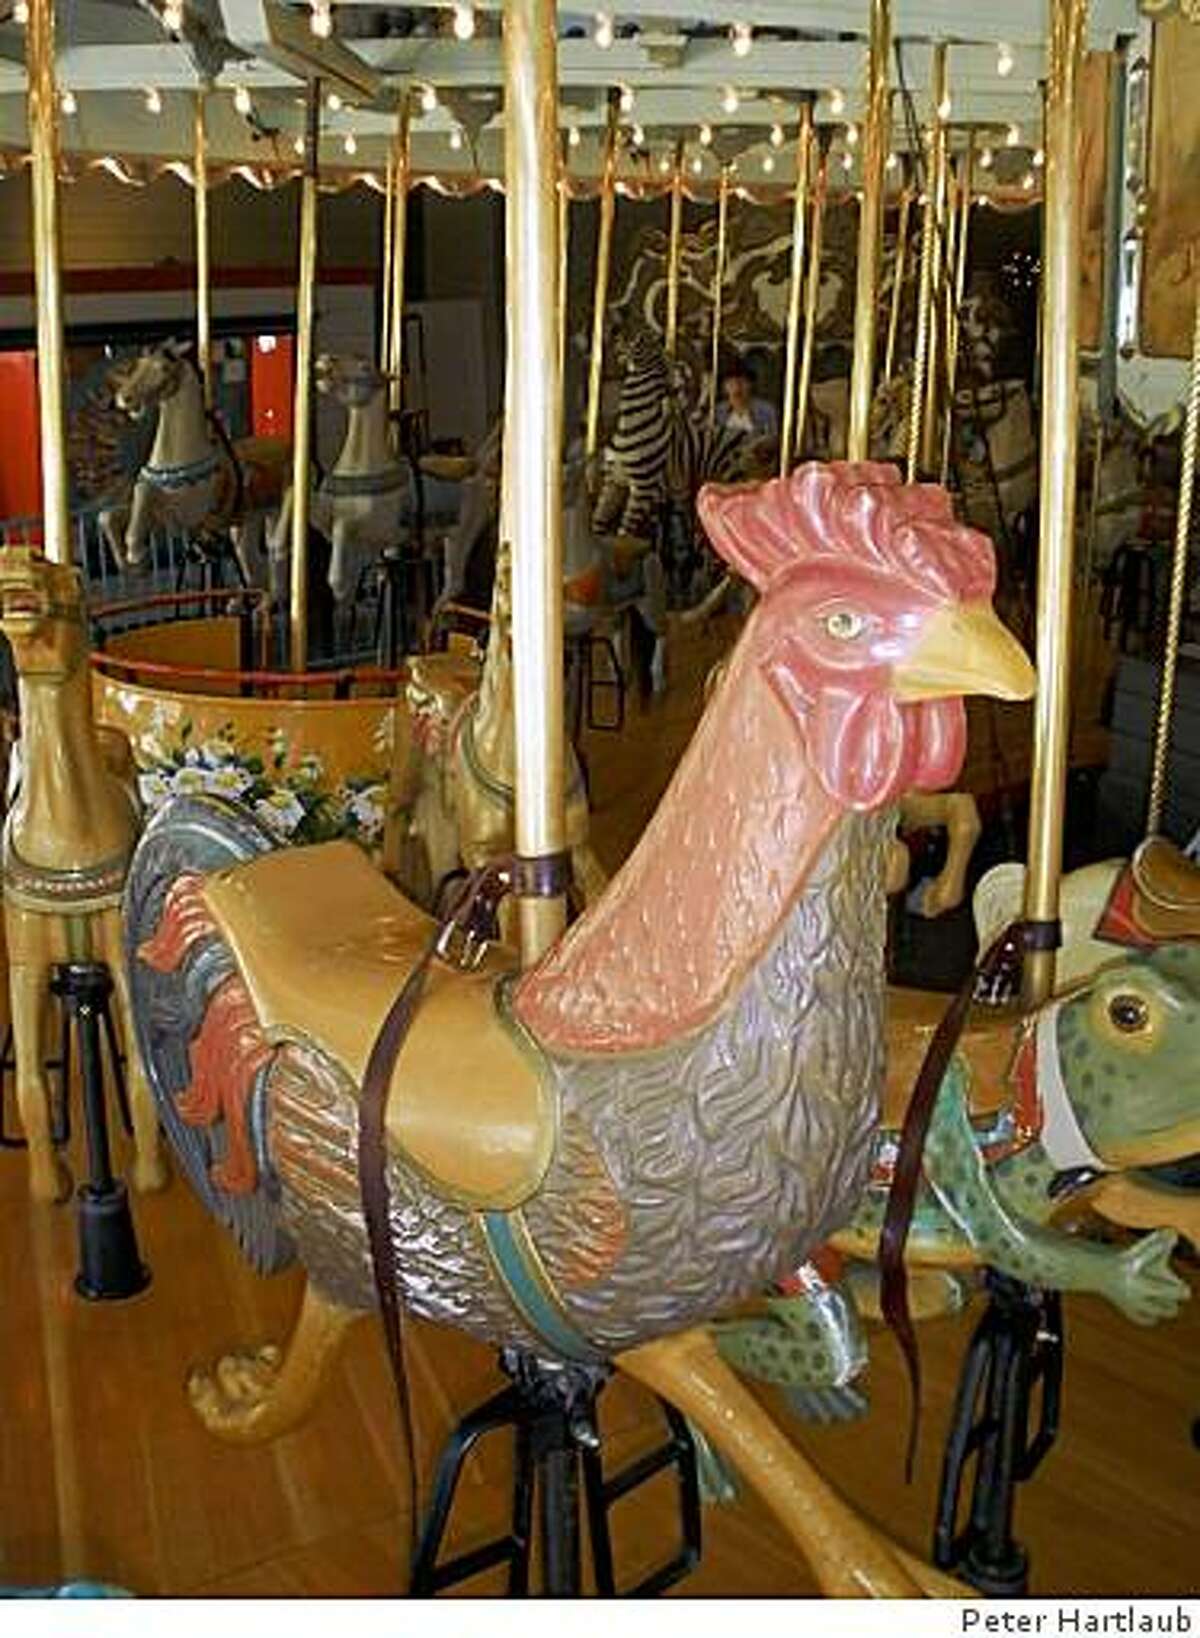 A rooster figure at the Tilden Park Merry-Go-Round.